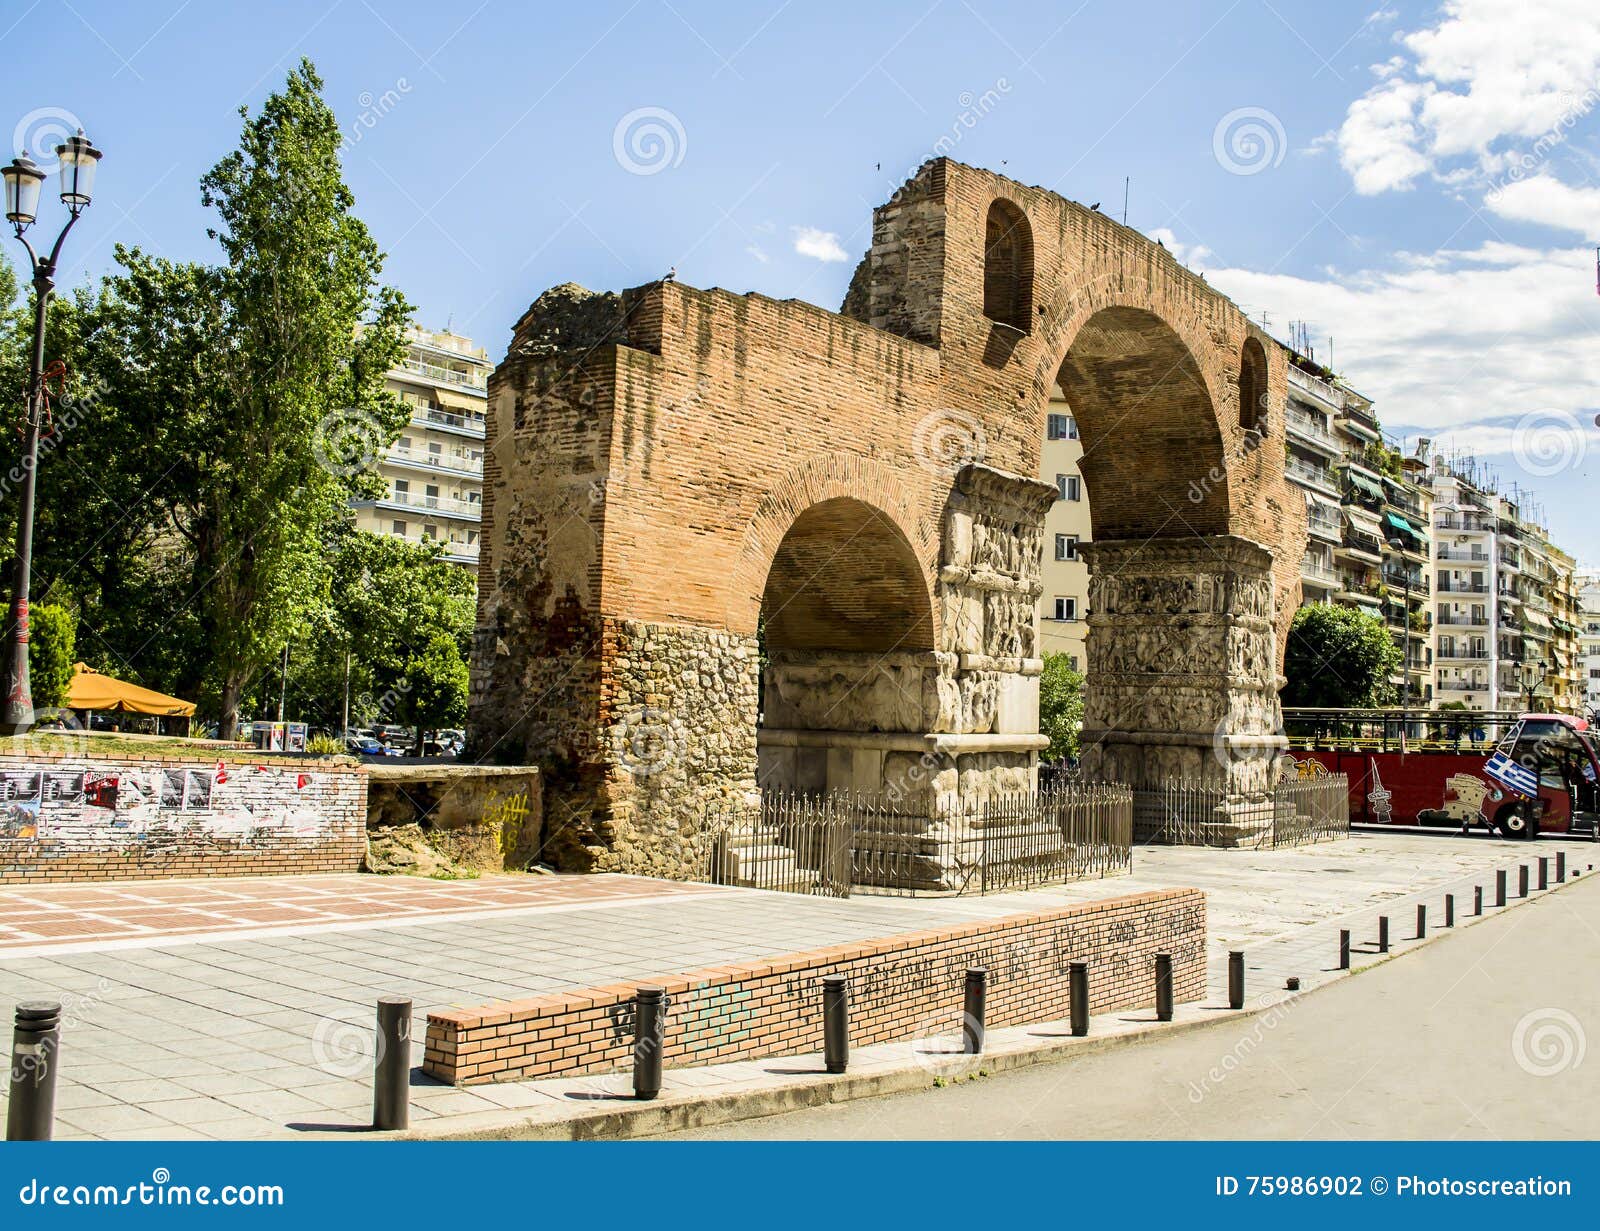 Arch Of Galerius At Thessaloniki City, Greece Stock Photo ...